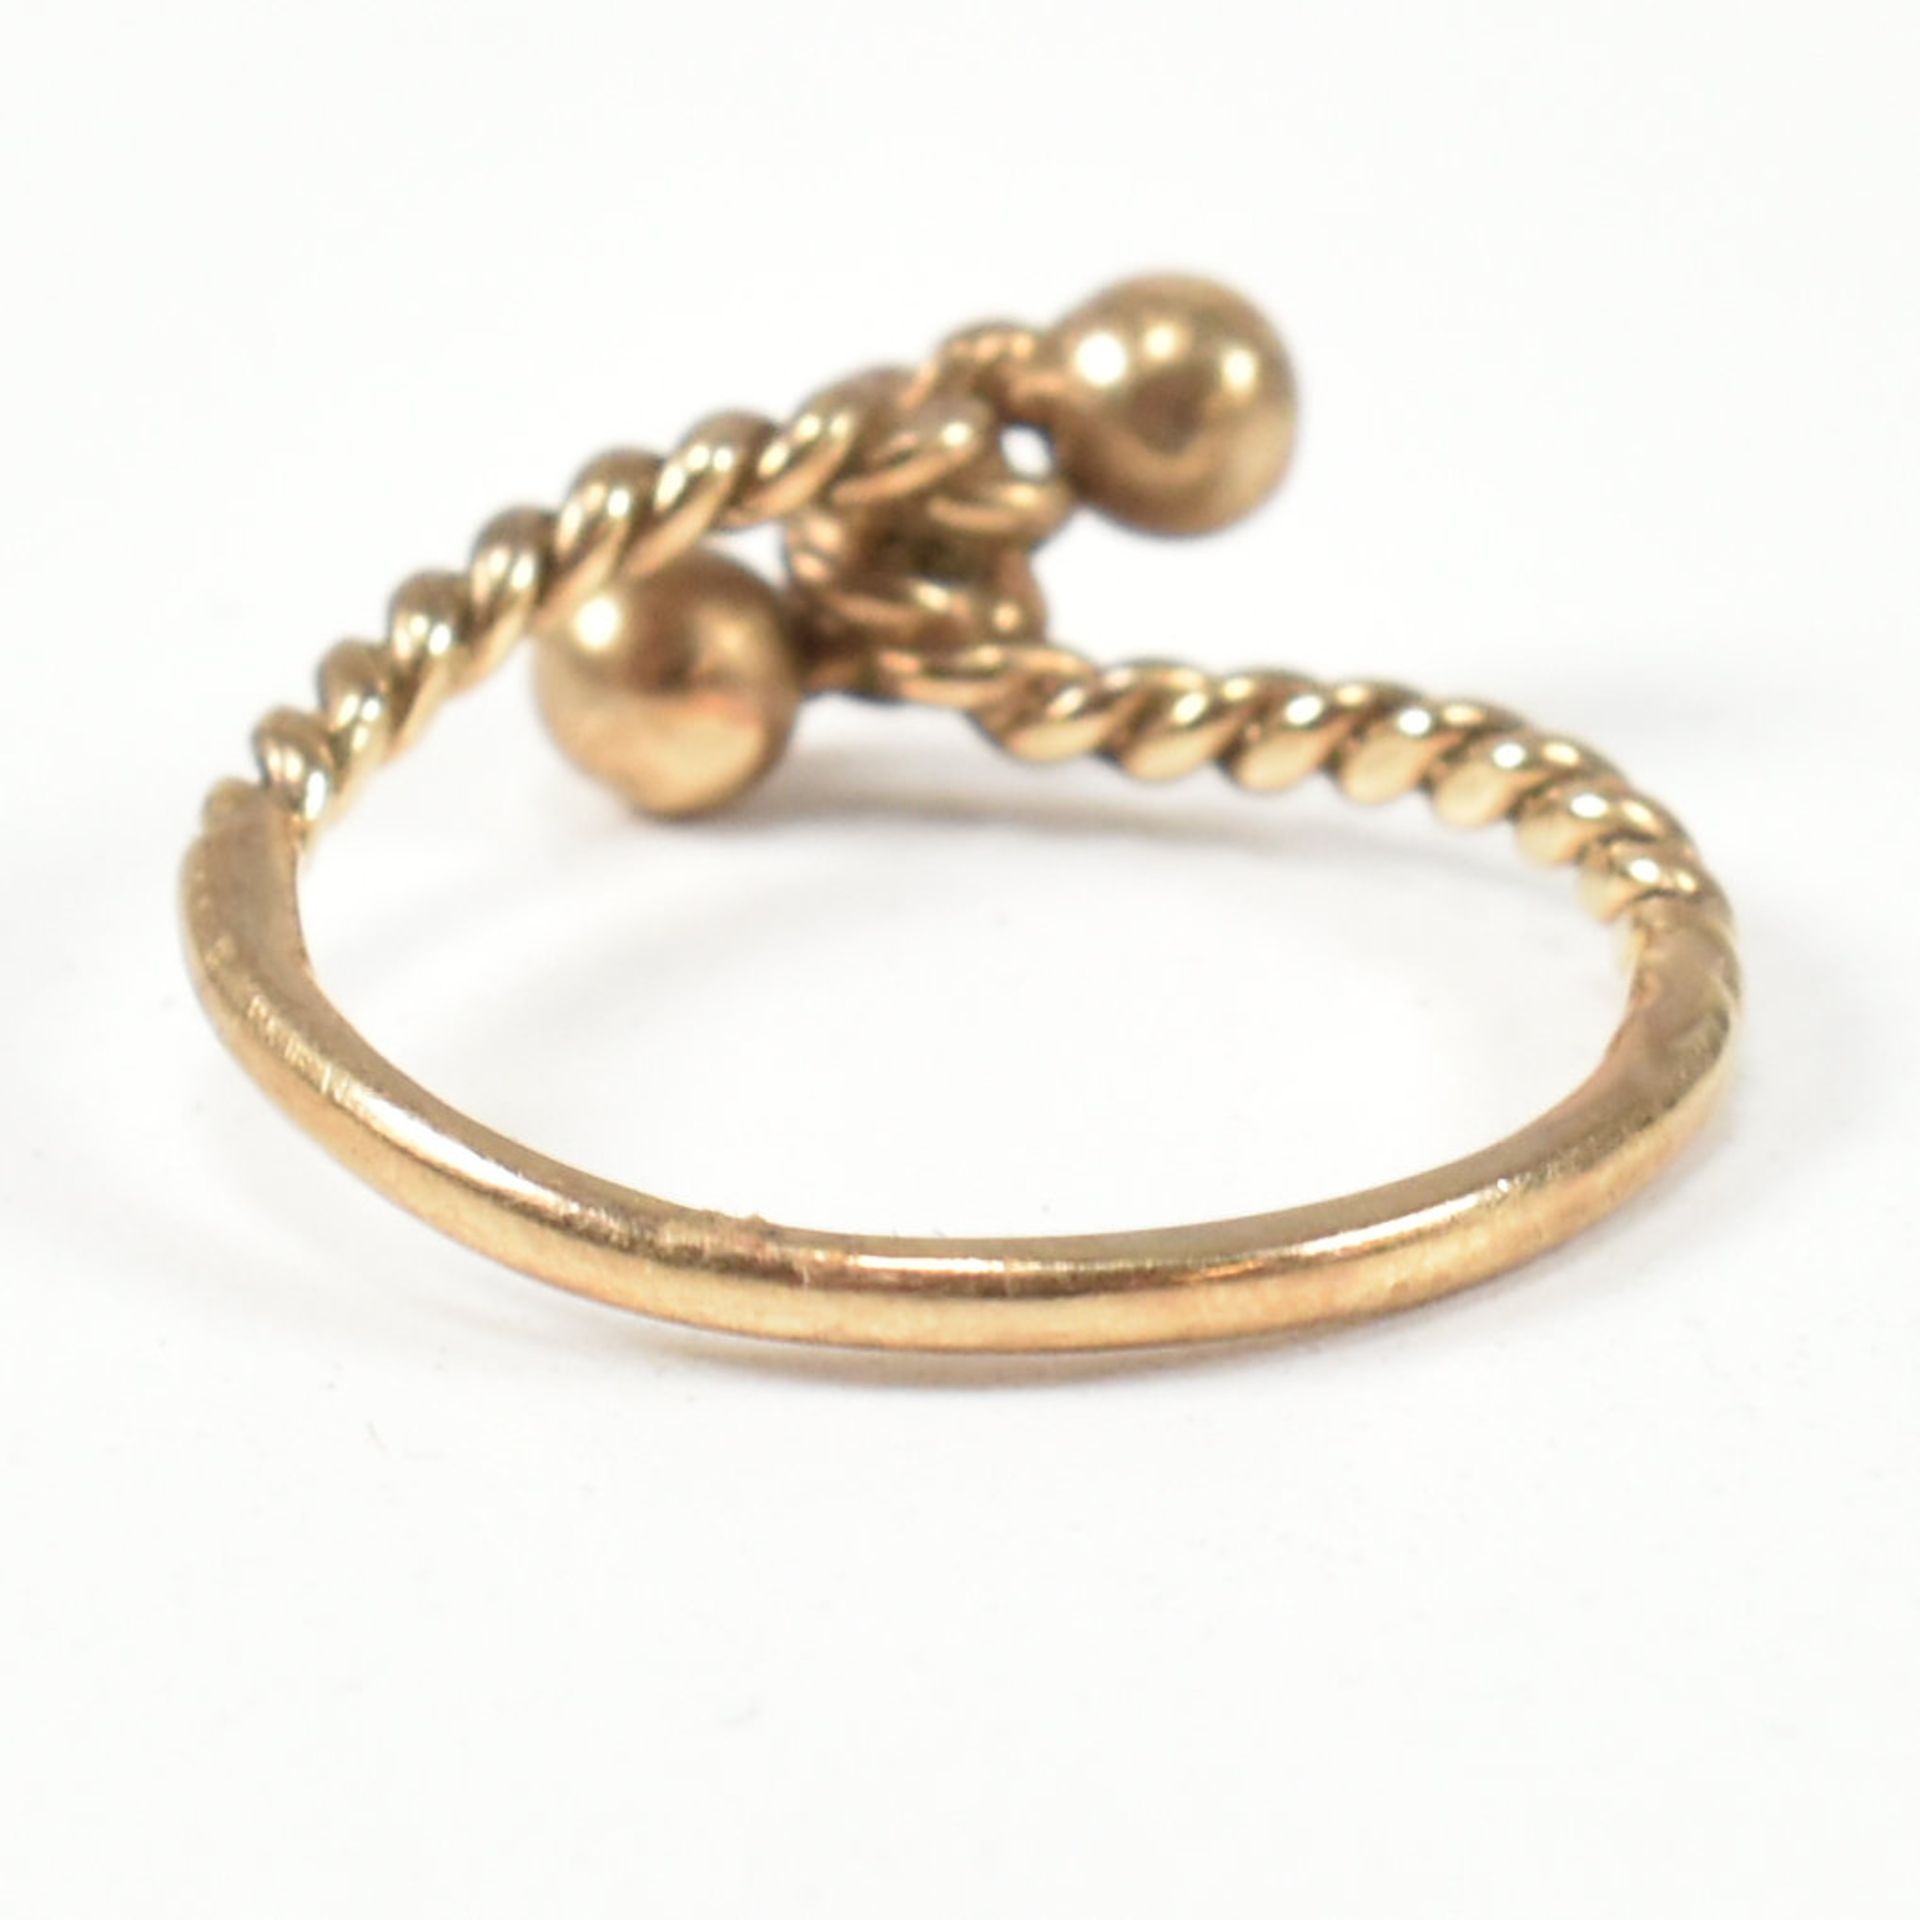 HALLMARKED 9CT GOLD ROPE TWIST RING - Image 5 of 8